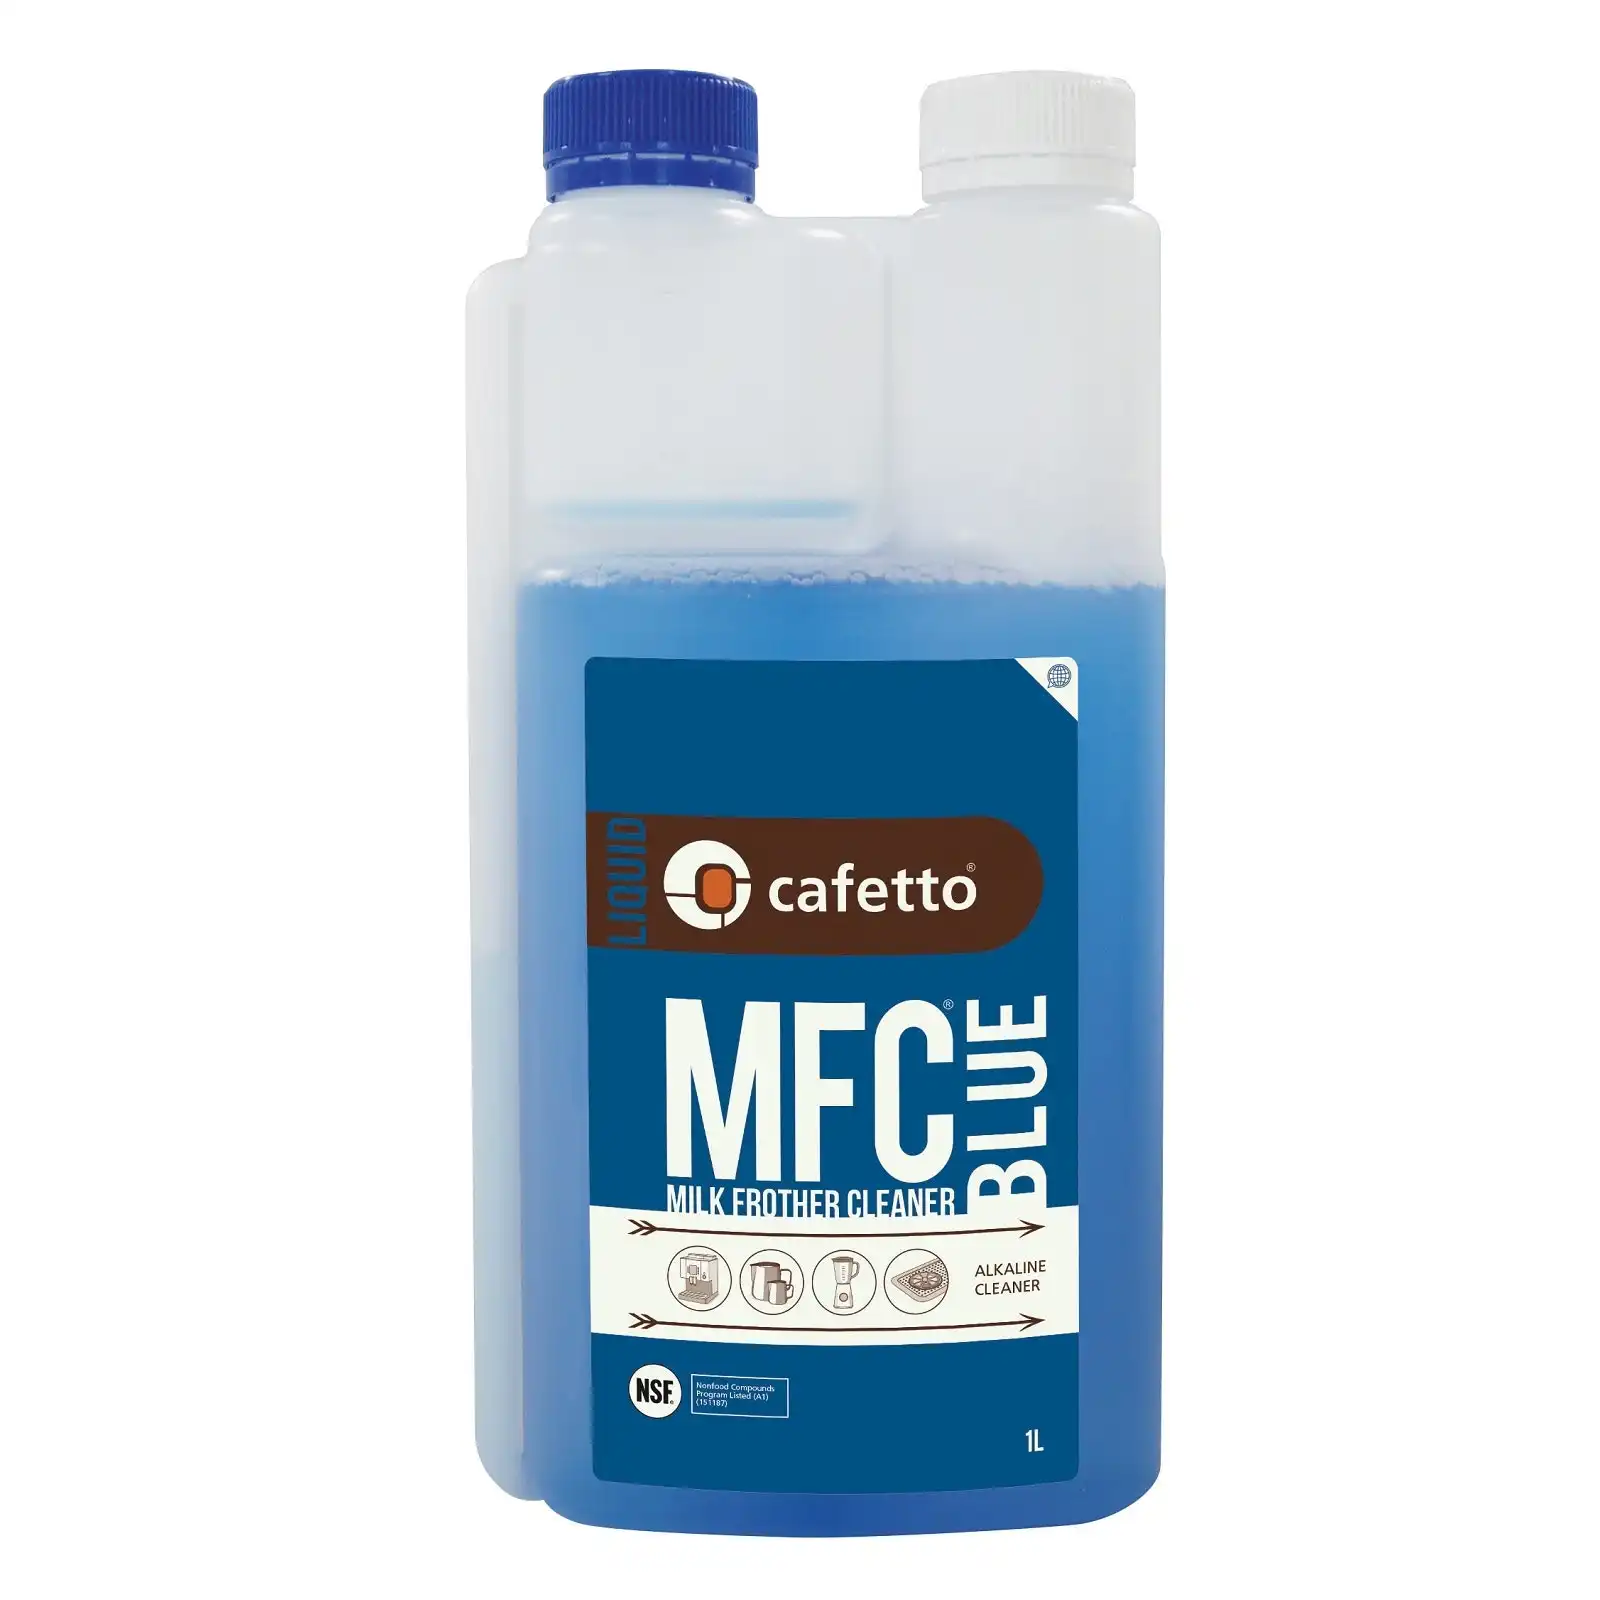 Cafetto MFC ORGANIC MILK FROTHER CLEANER - BLUE - 1 Litre